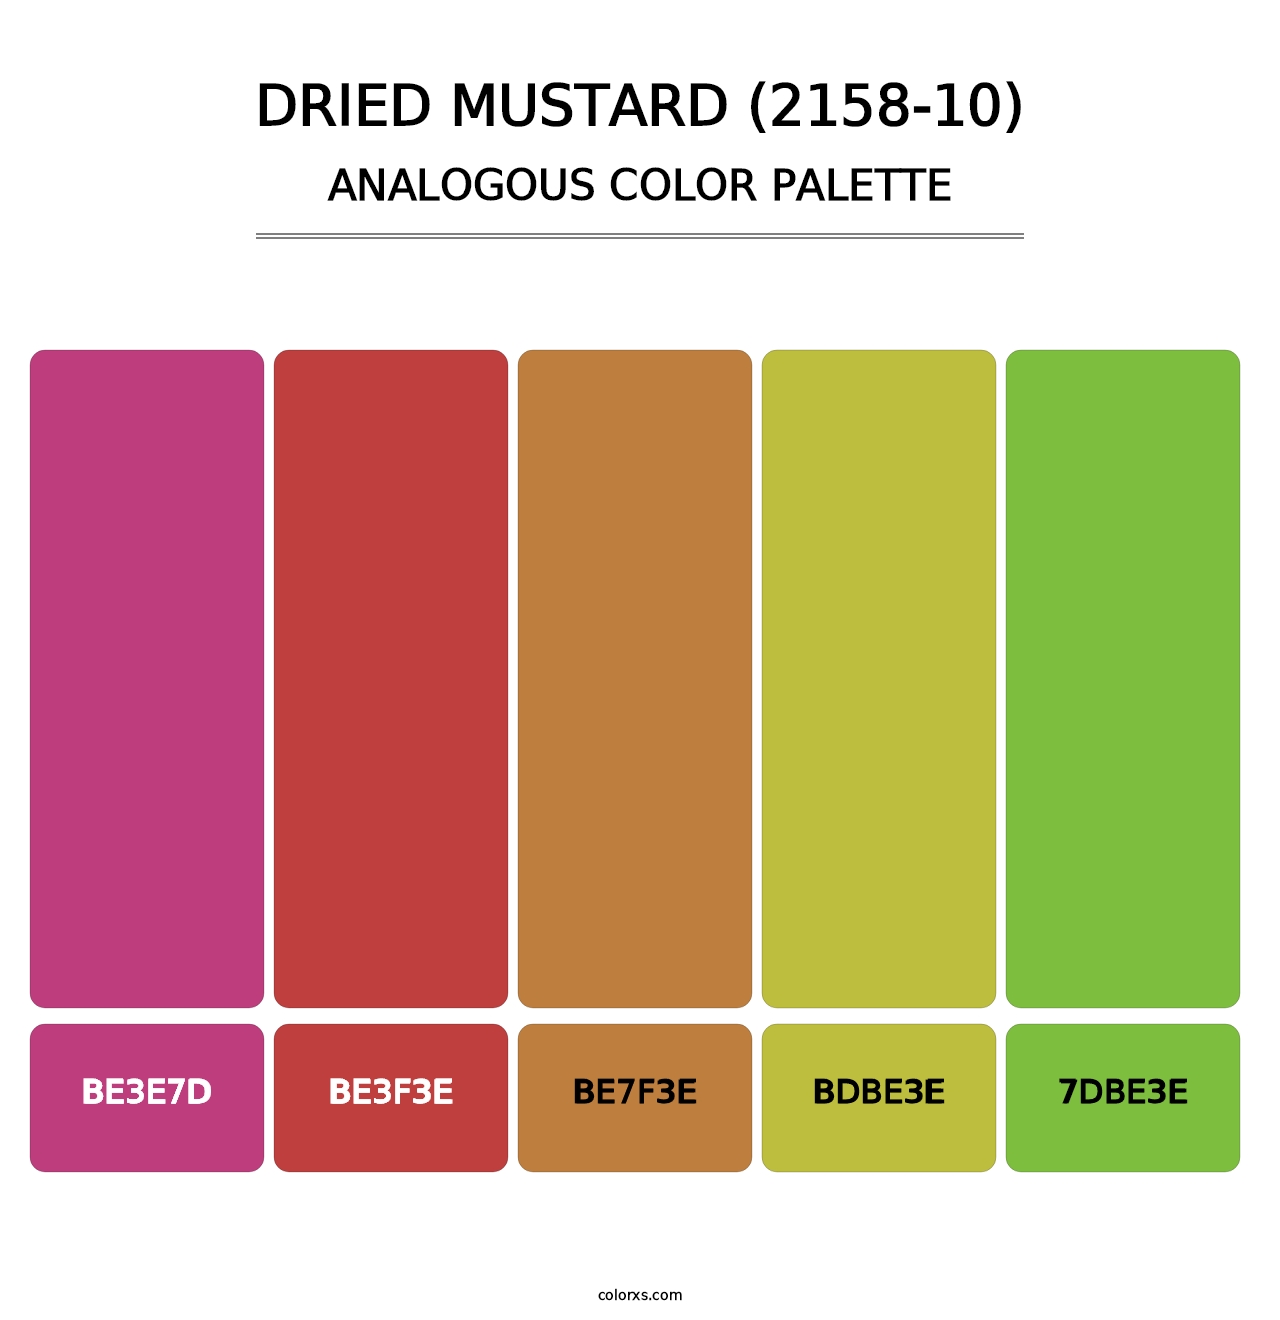 Dried Mustard (2158-10) - Analogous Color Palette